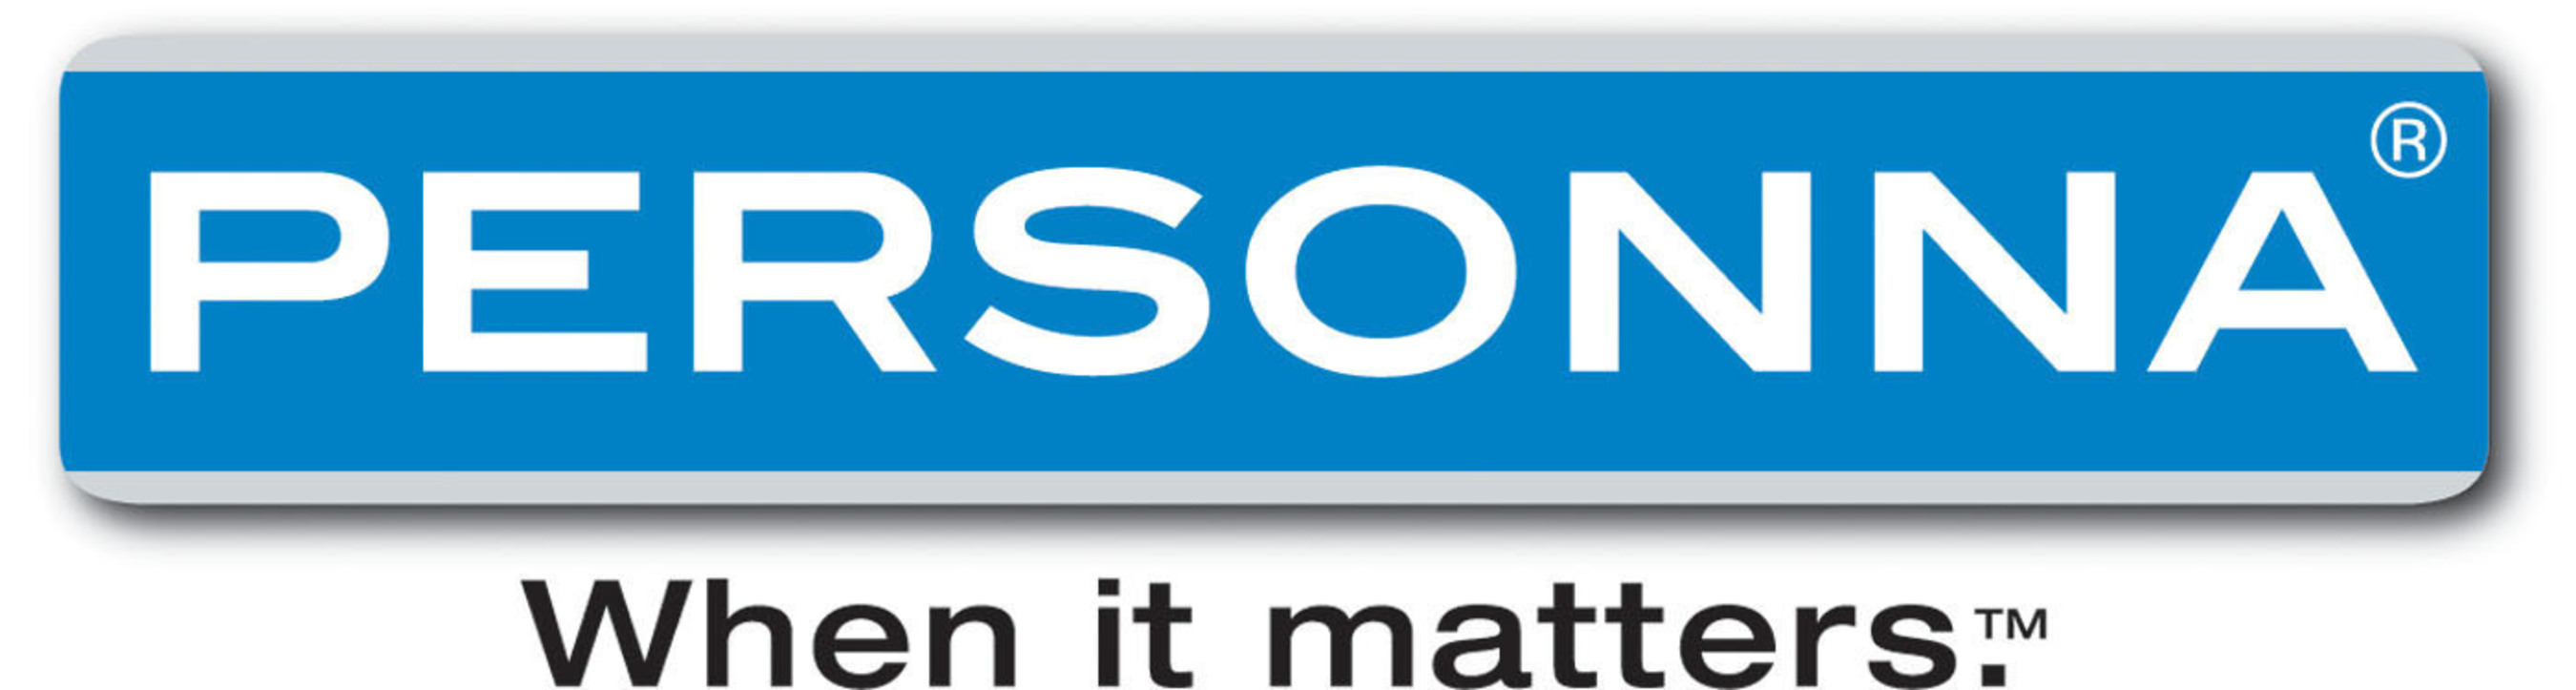 Personna(R) When it matters logo. Personna is one of the largest producers of professional, medical, and industrial blades with manufacturing facilities in North America. Personna is dedicated to creating blades and bladed products that satisfy the needs of professional, medical and industrial customers. From the most basic to the most advanced product, our goal is to deliver quality, performance and innovation.